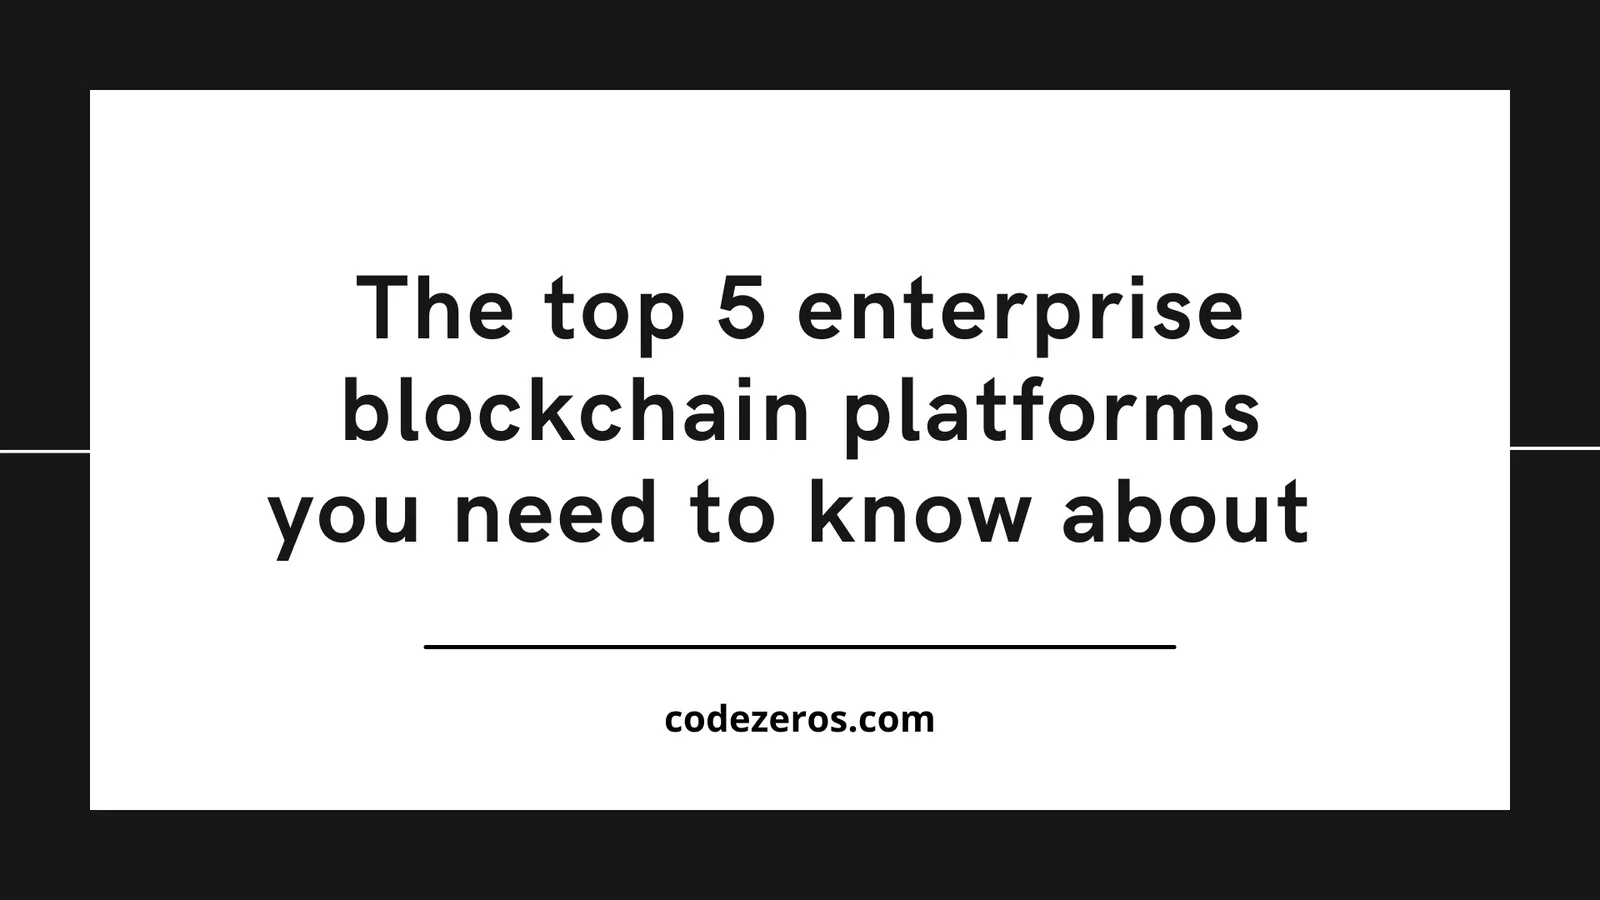 The top 5 enterprise blockchain platforms you need to know about 